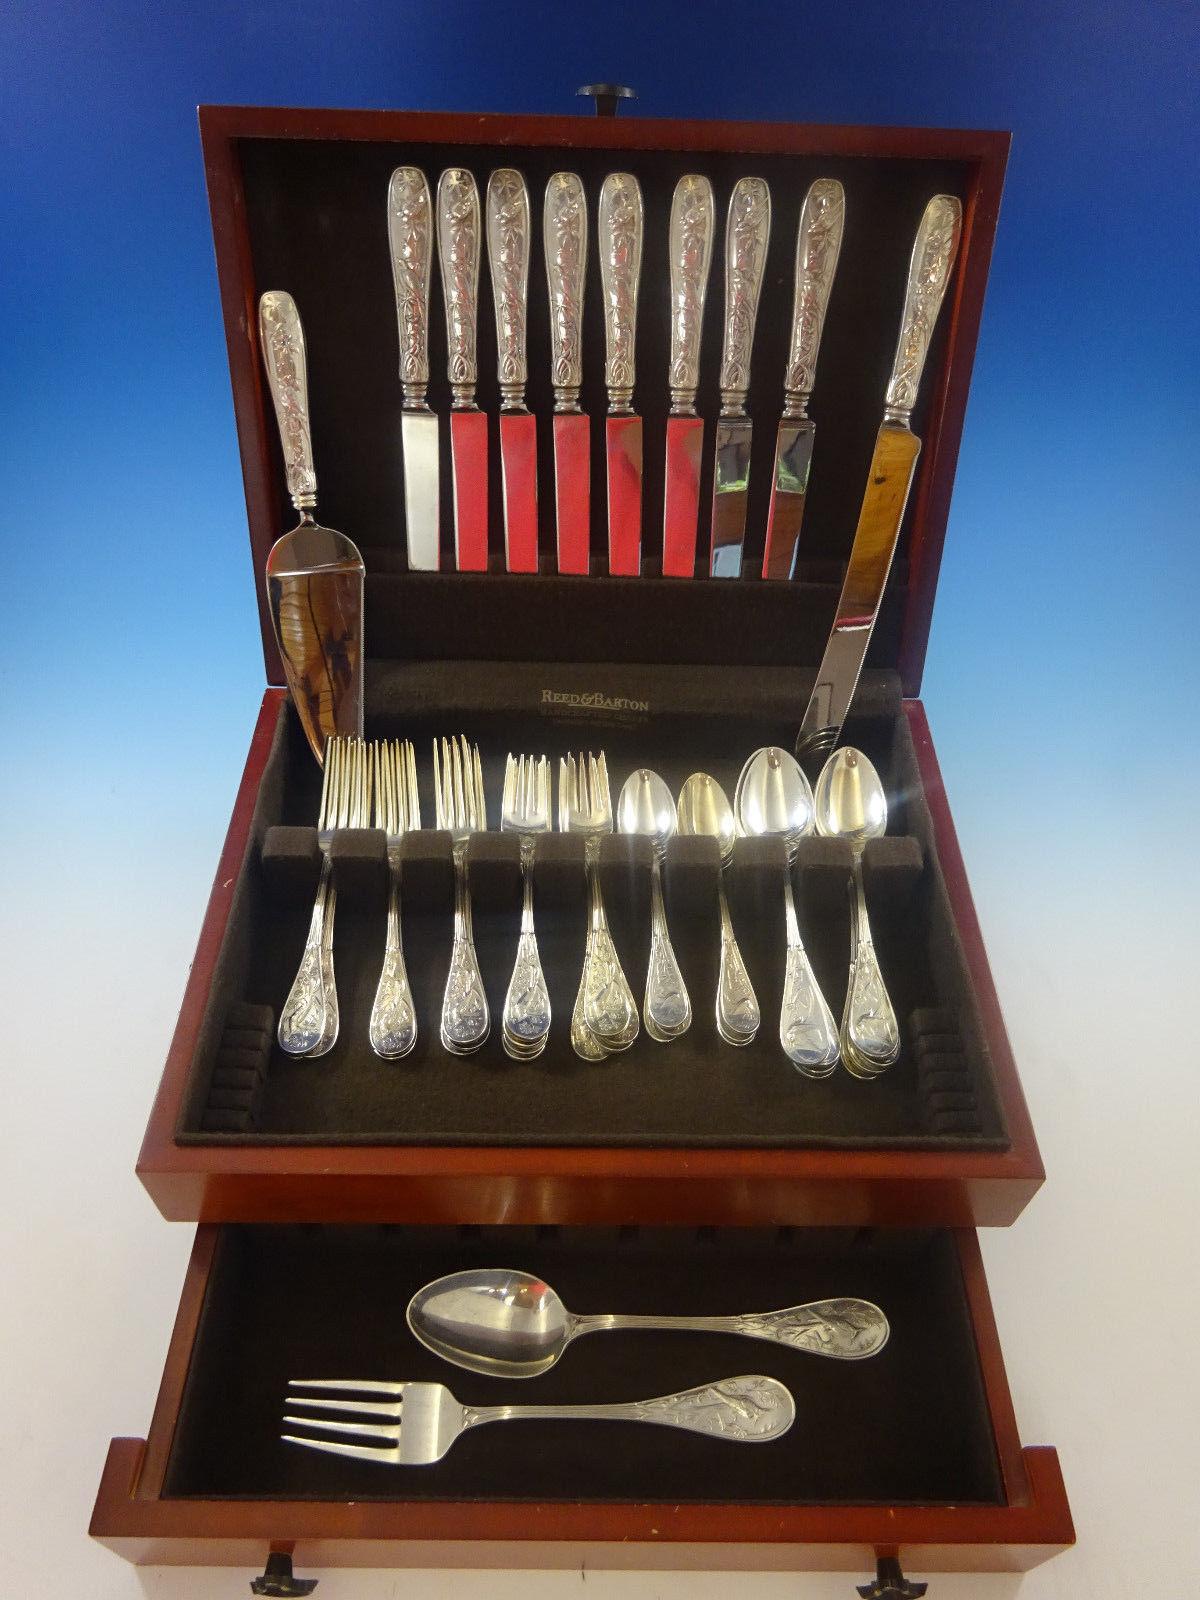 This estate set is circa 1960s, the pattern detailing is far superior compared to the pieces made today from worn out dies. 

Audubon by Tiffany & Co. sterling silver flatware set, 44 pieces. This set includes: 

Eight dinner size knives, 10